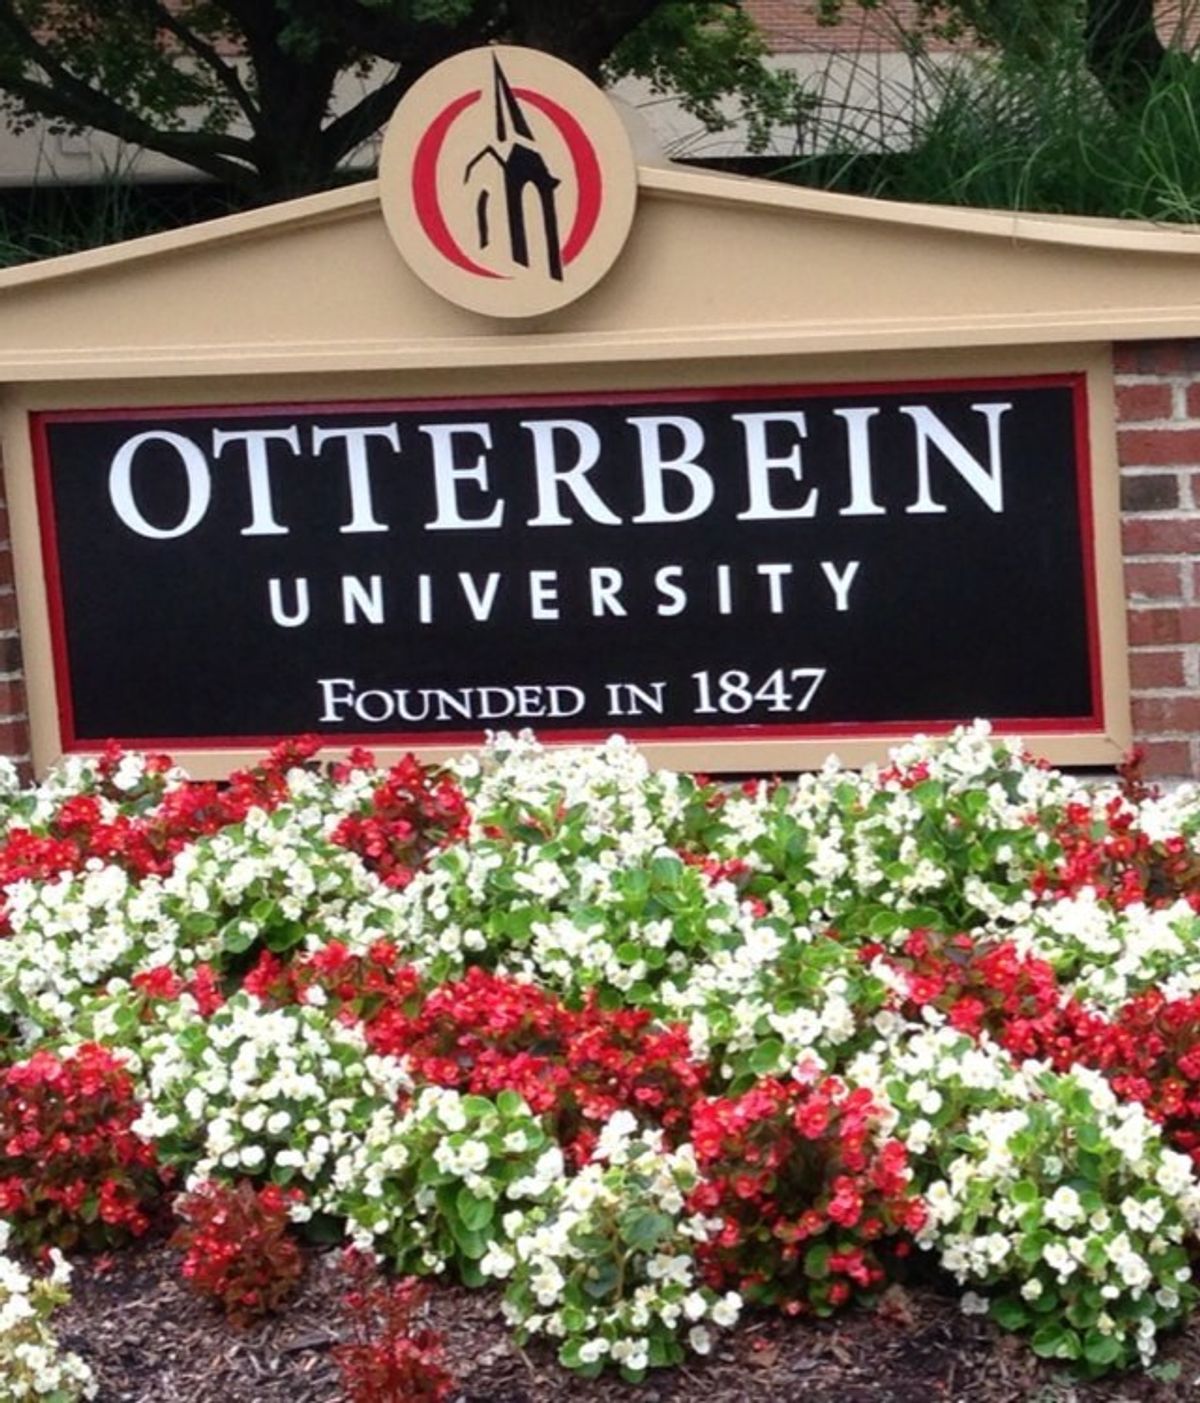 How Otterbein Changed The Meaning Of "Back To School" For Me